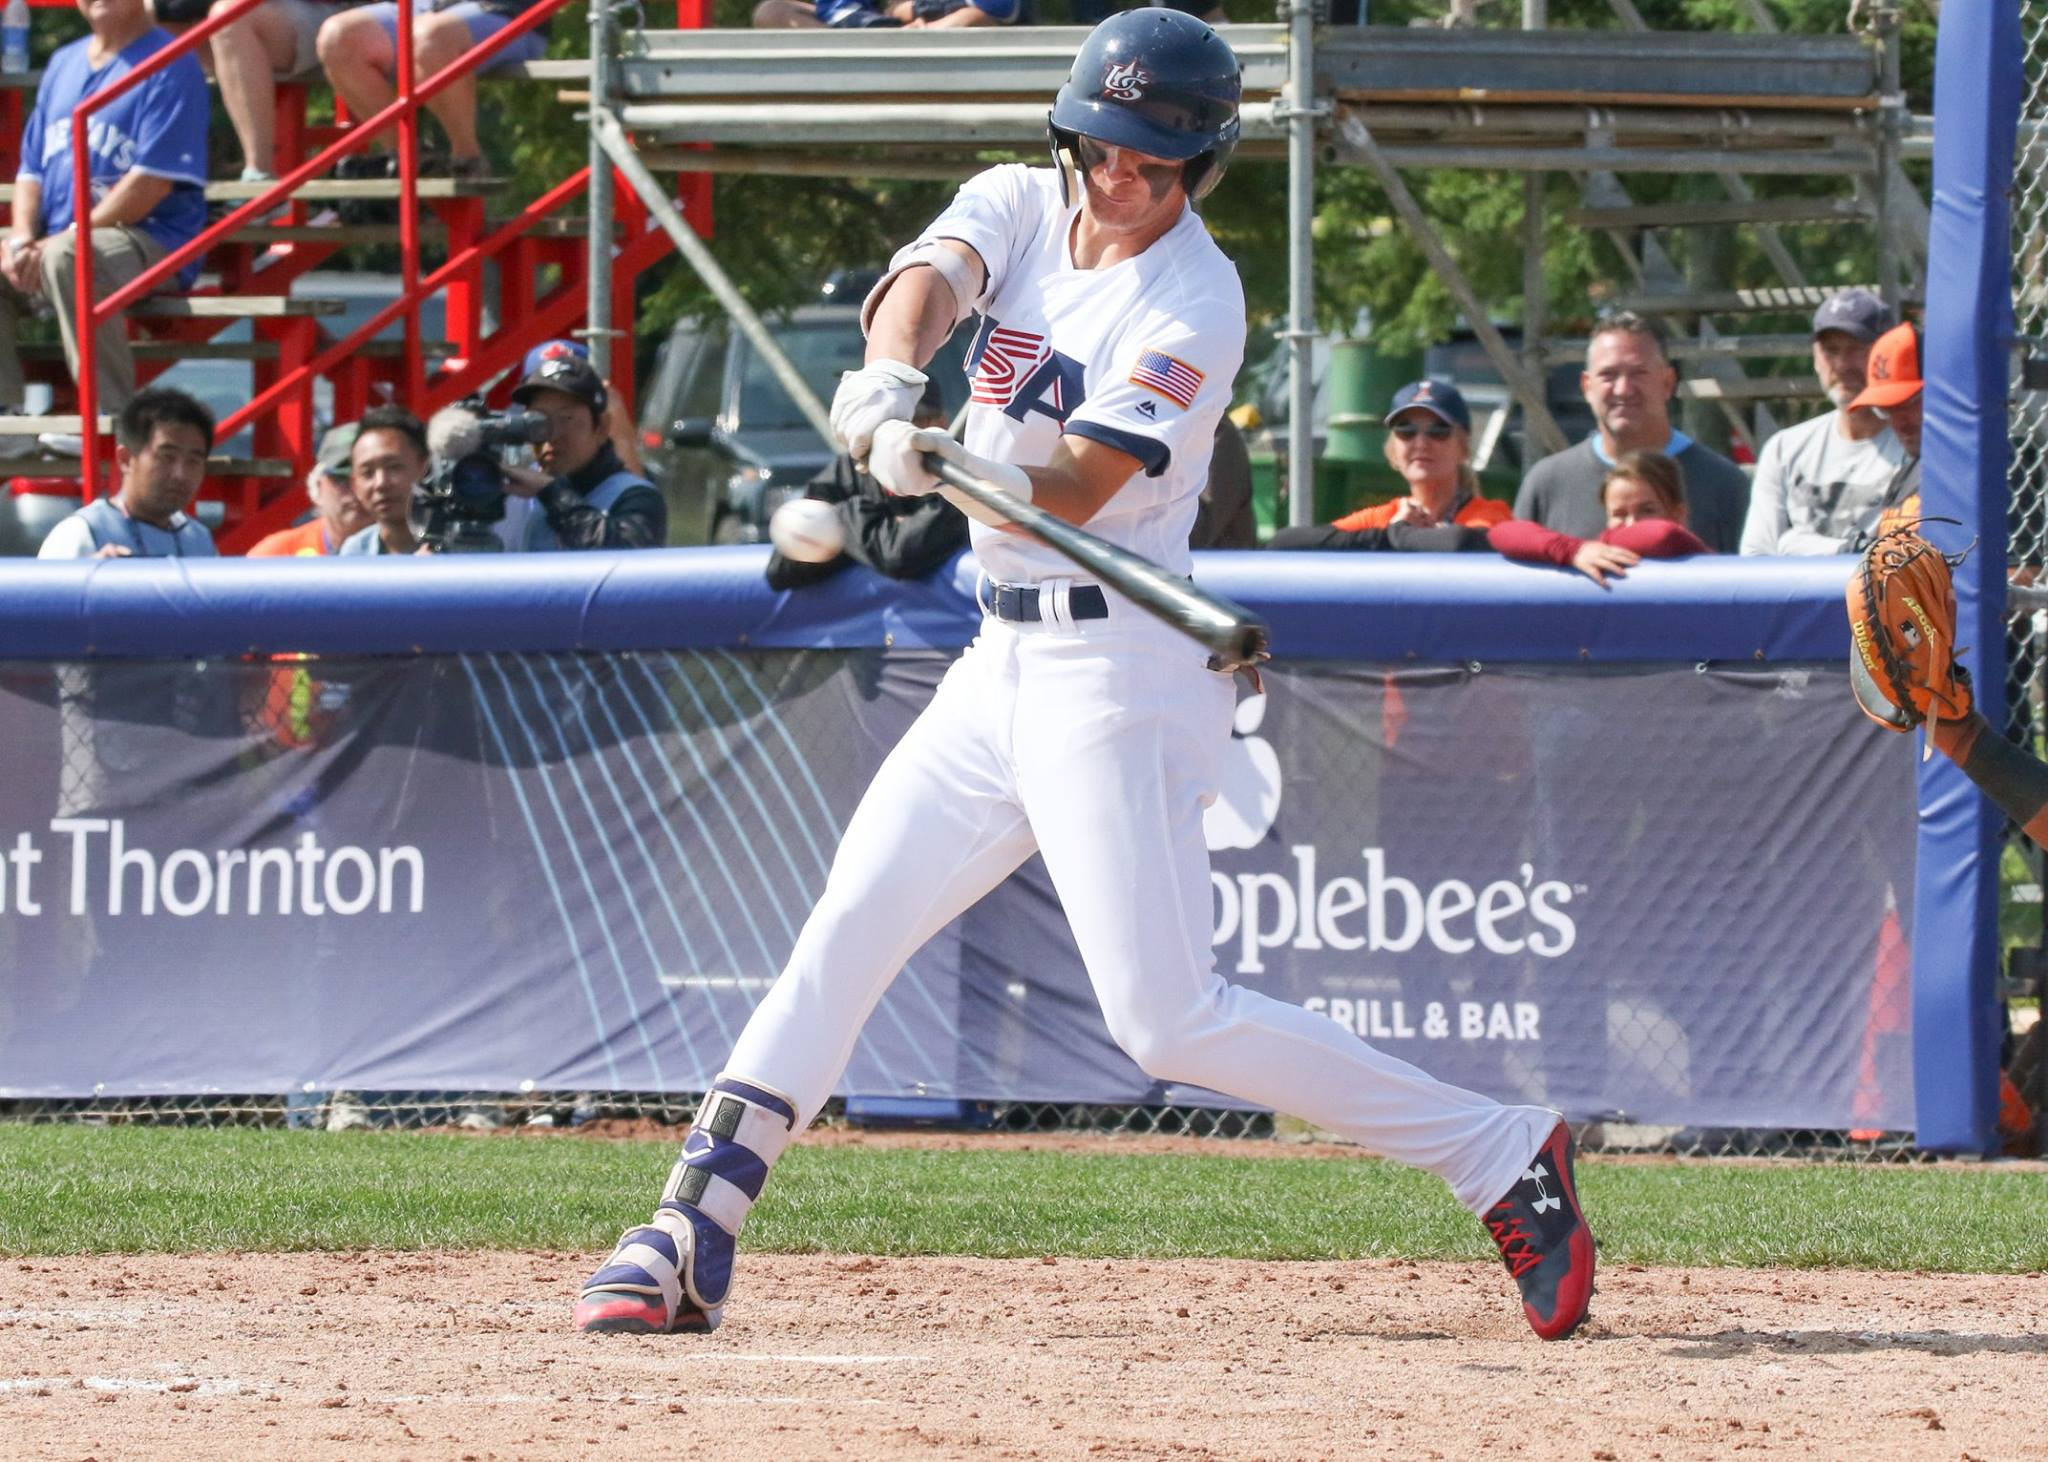 Defending champions United States begin WBSC Under-18 World Cup with big victory